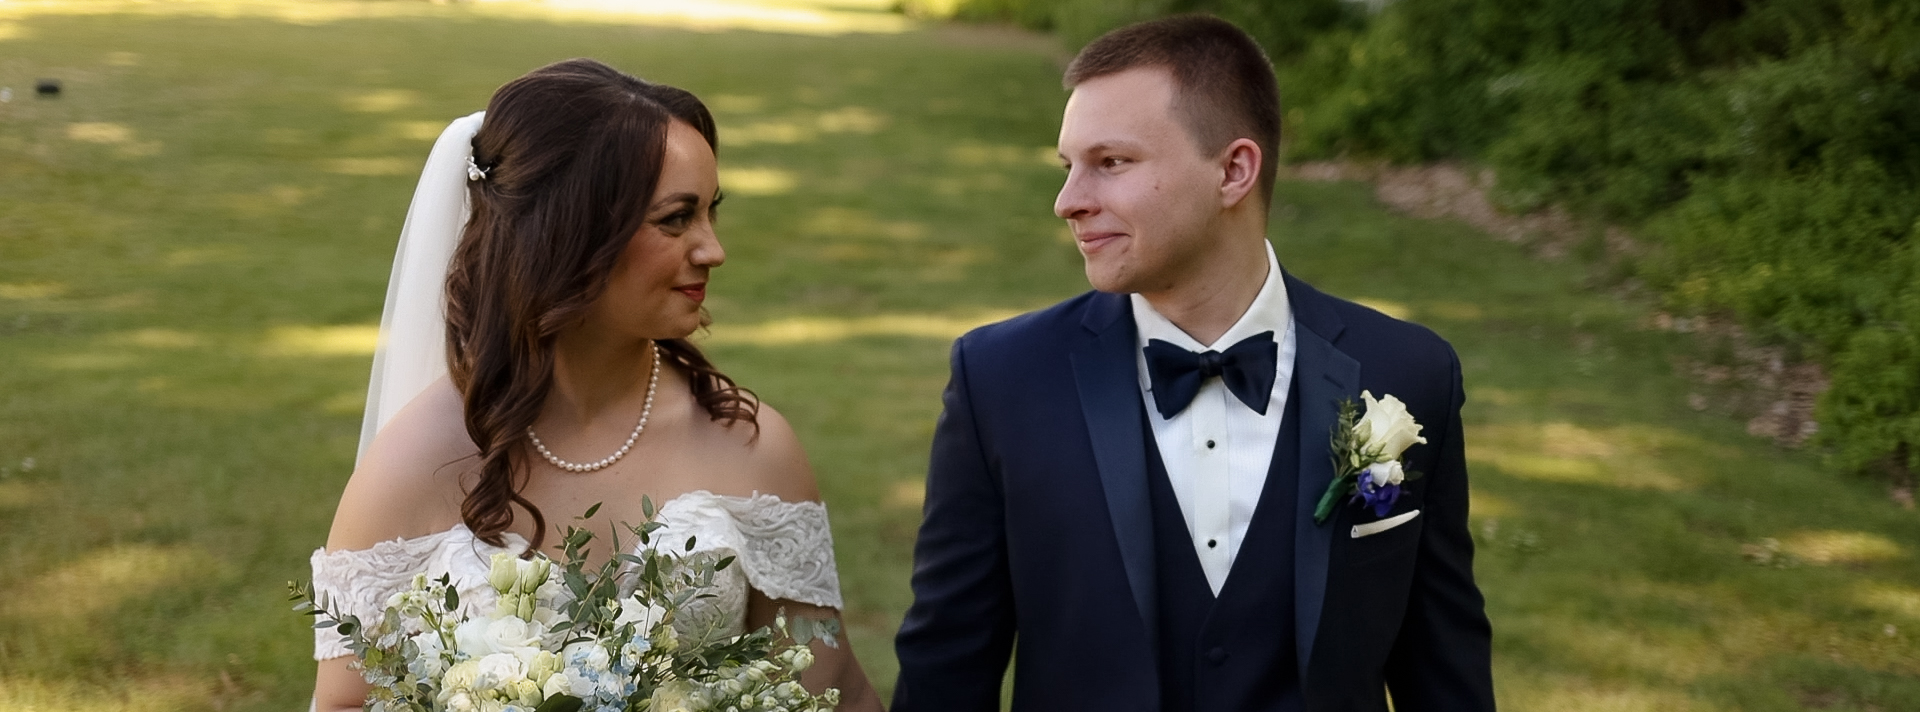 Couple looking at each other while walking in a shady grass field. Bride is wearing a veil, a pearl necklace and an off-the-shoulder dress and the groom is wearing a dark blue suit with a black bowtie